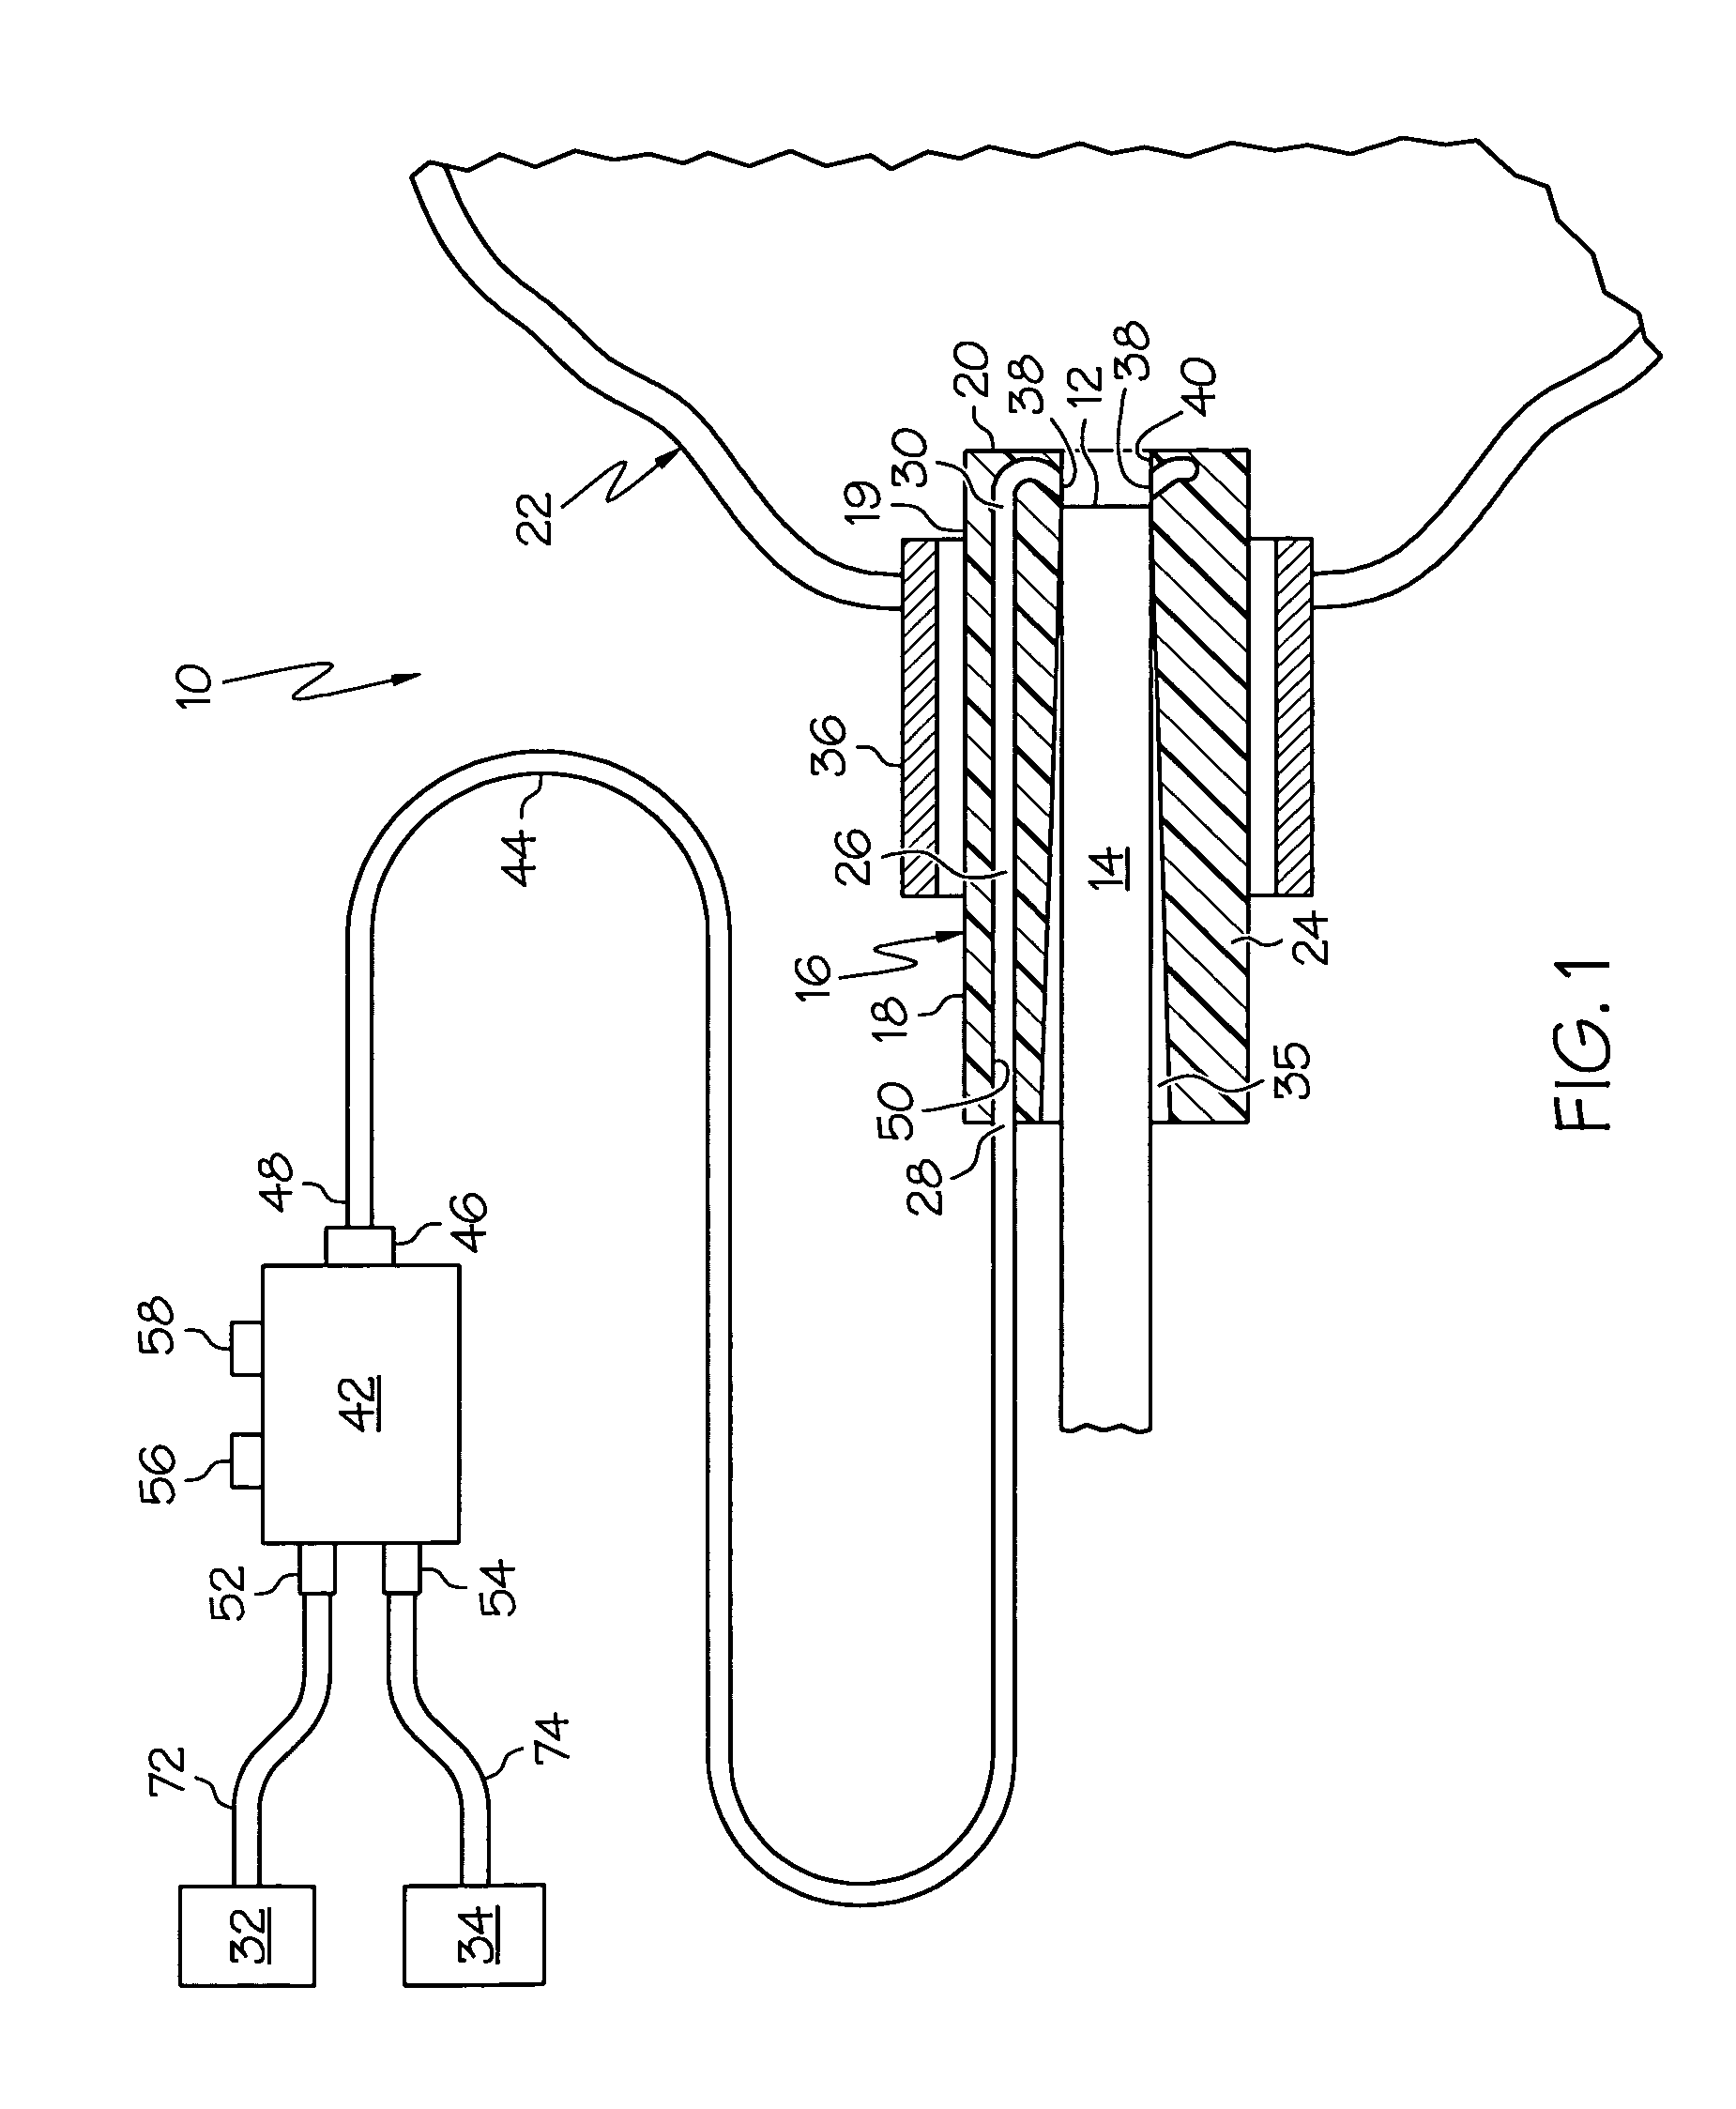 Apparatus for cleaning a distal scope end of a medical viewing scope